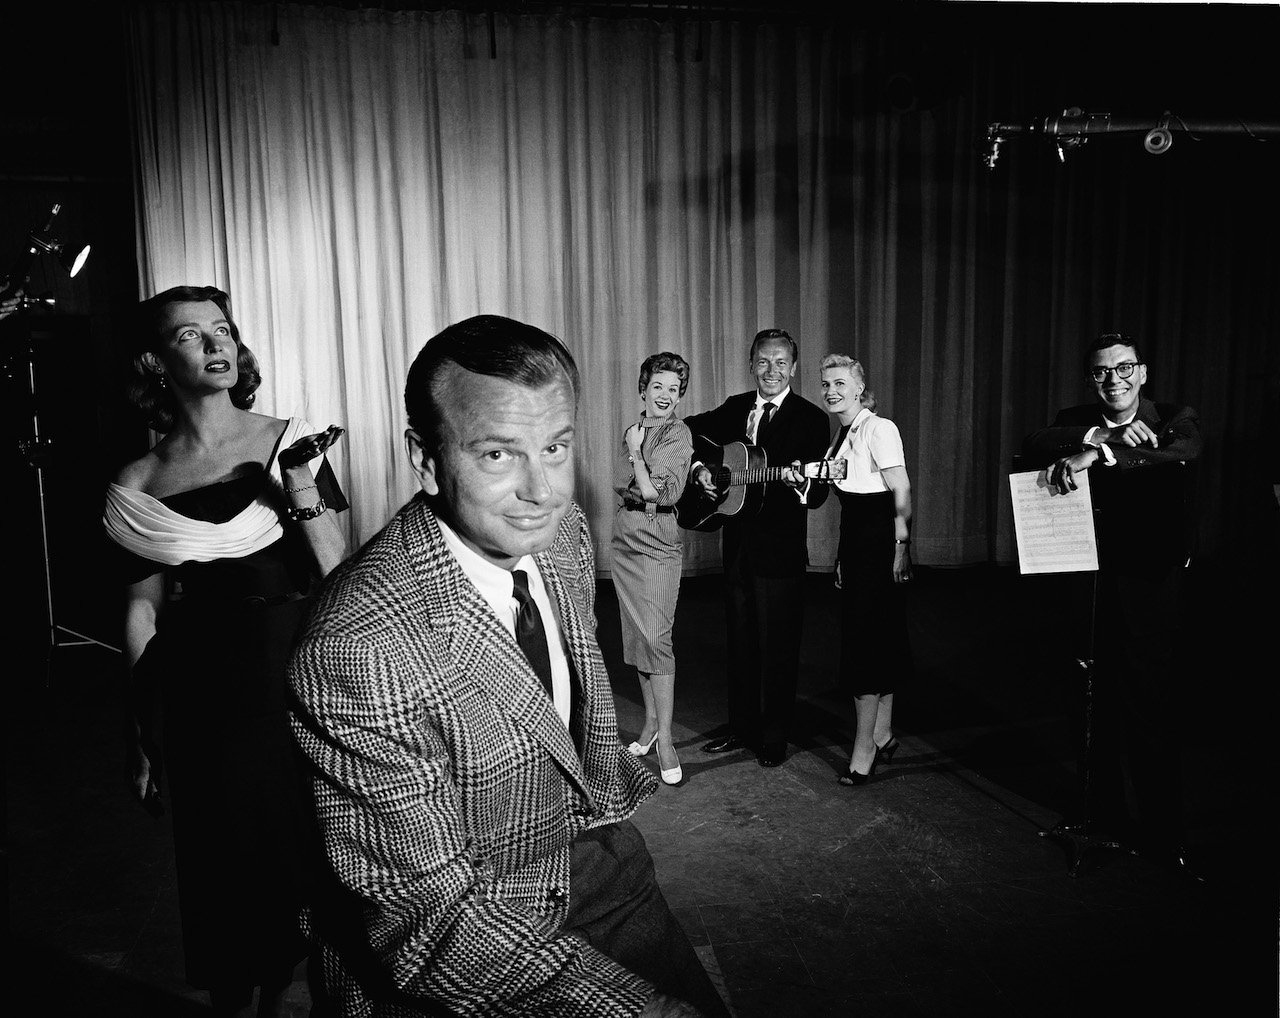 Black and white photo of 'The Jack Paar Show' cast